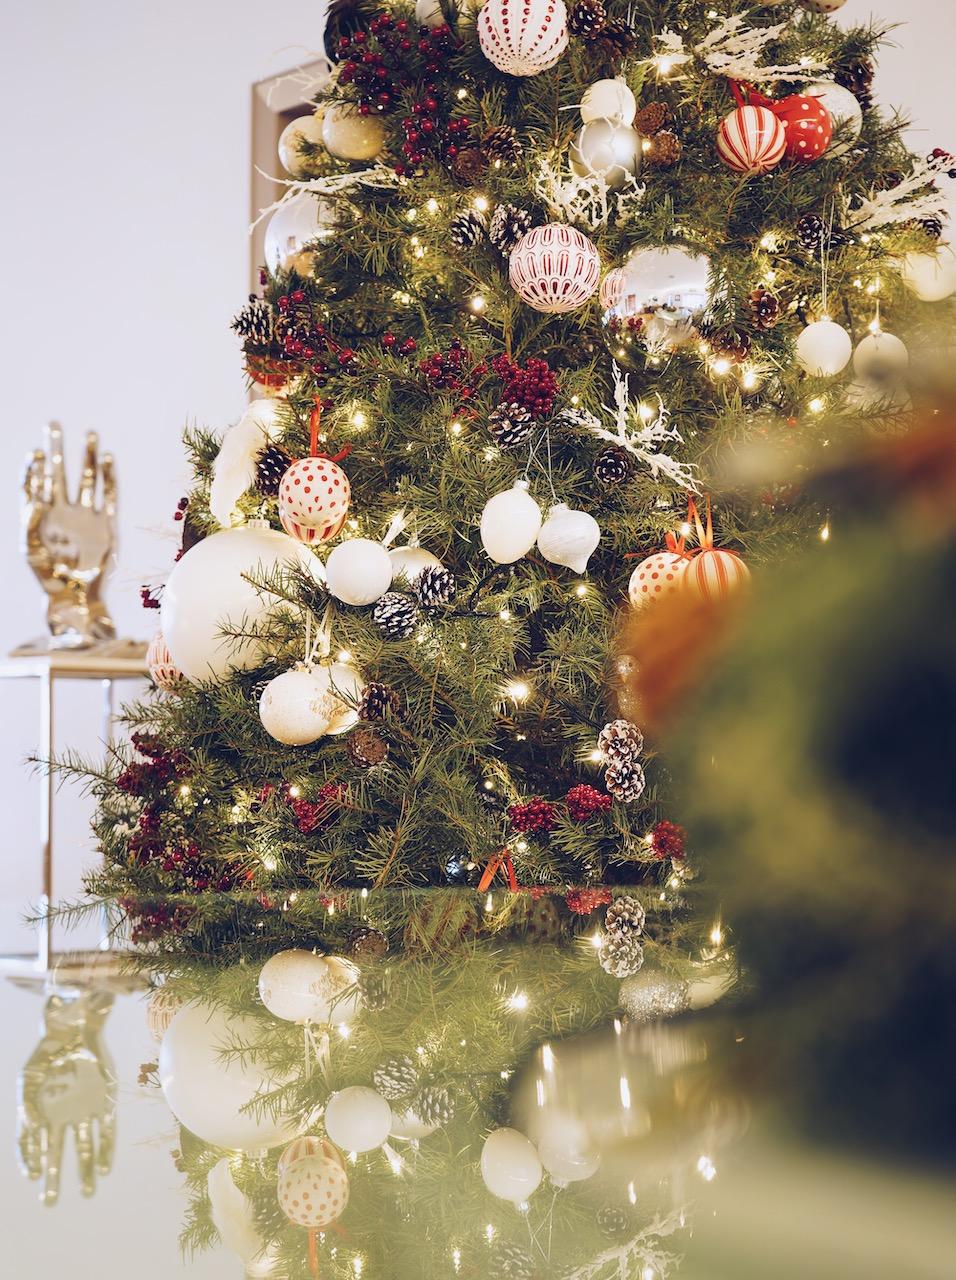 How To Decorate For Christmas According To Interior Designer Meng Jing